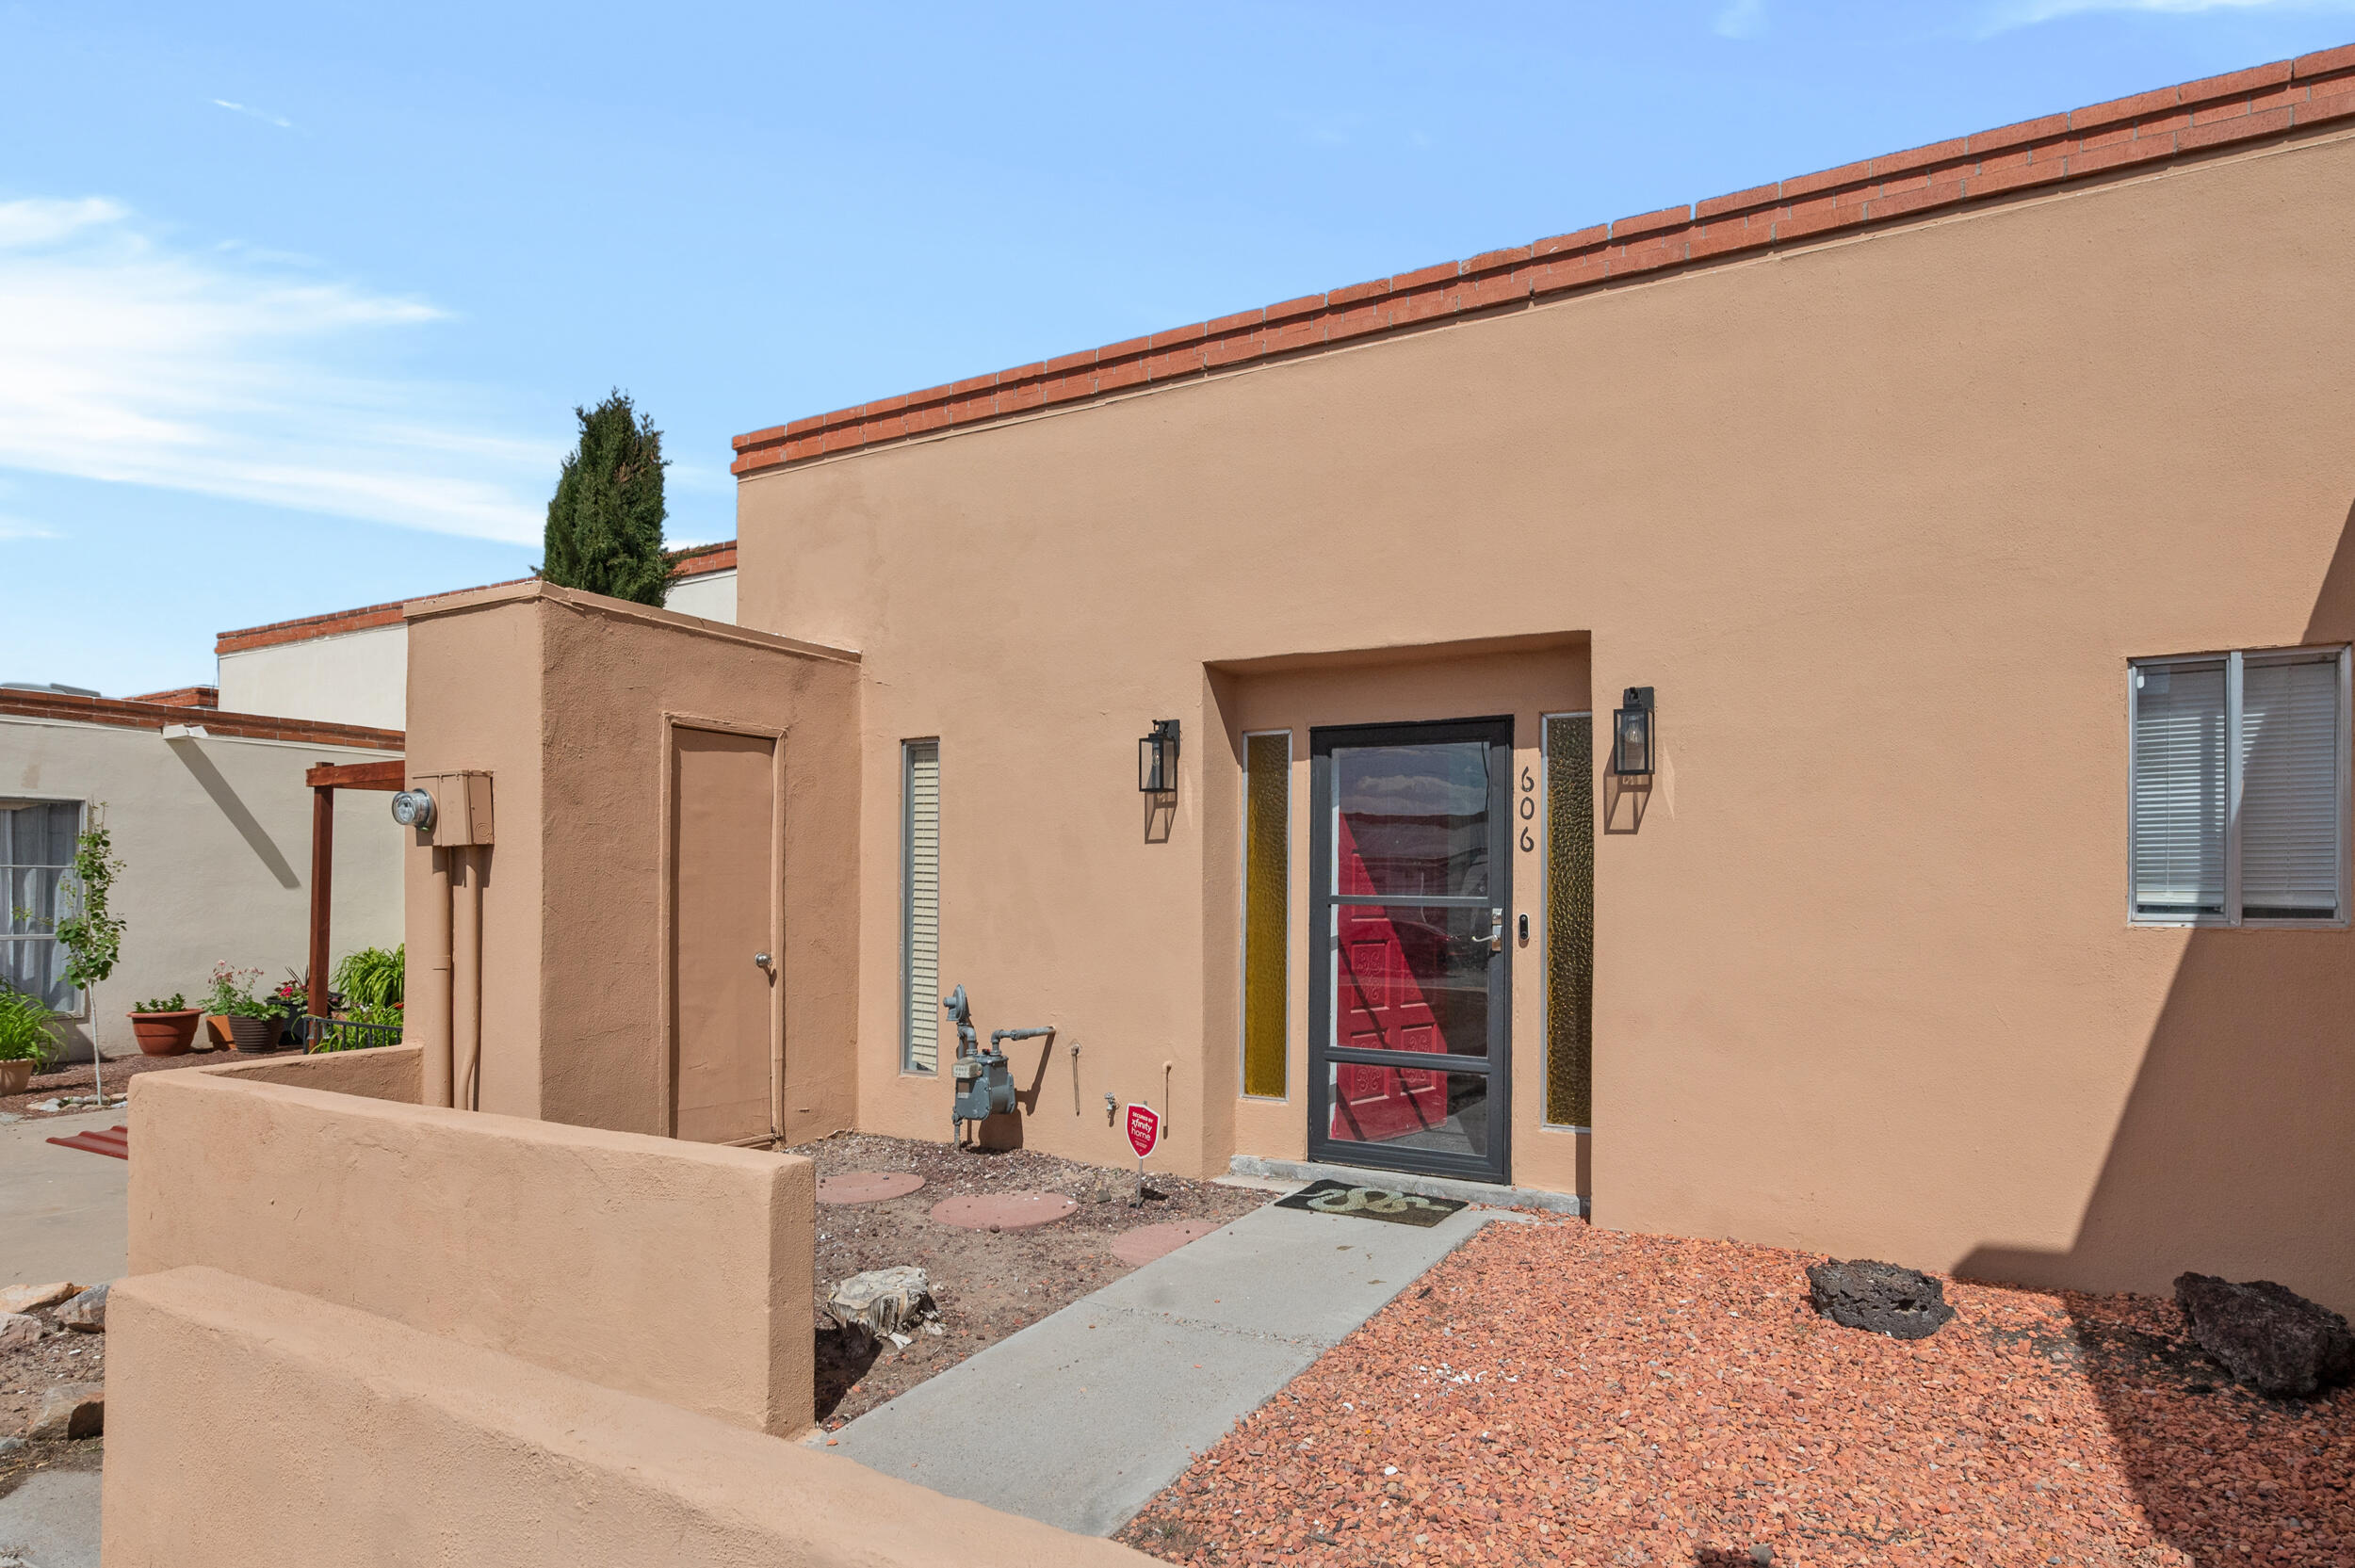 Check out this clean well put together town home, located right by Tierra Del Sol Golf Course.3 bedroom 2 bathroom, spacious bedrooms, perfect for any family. Appliances included, your new home awaits you.